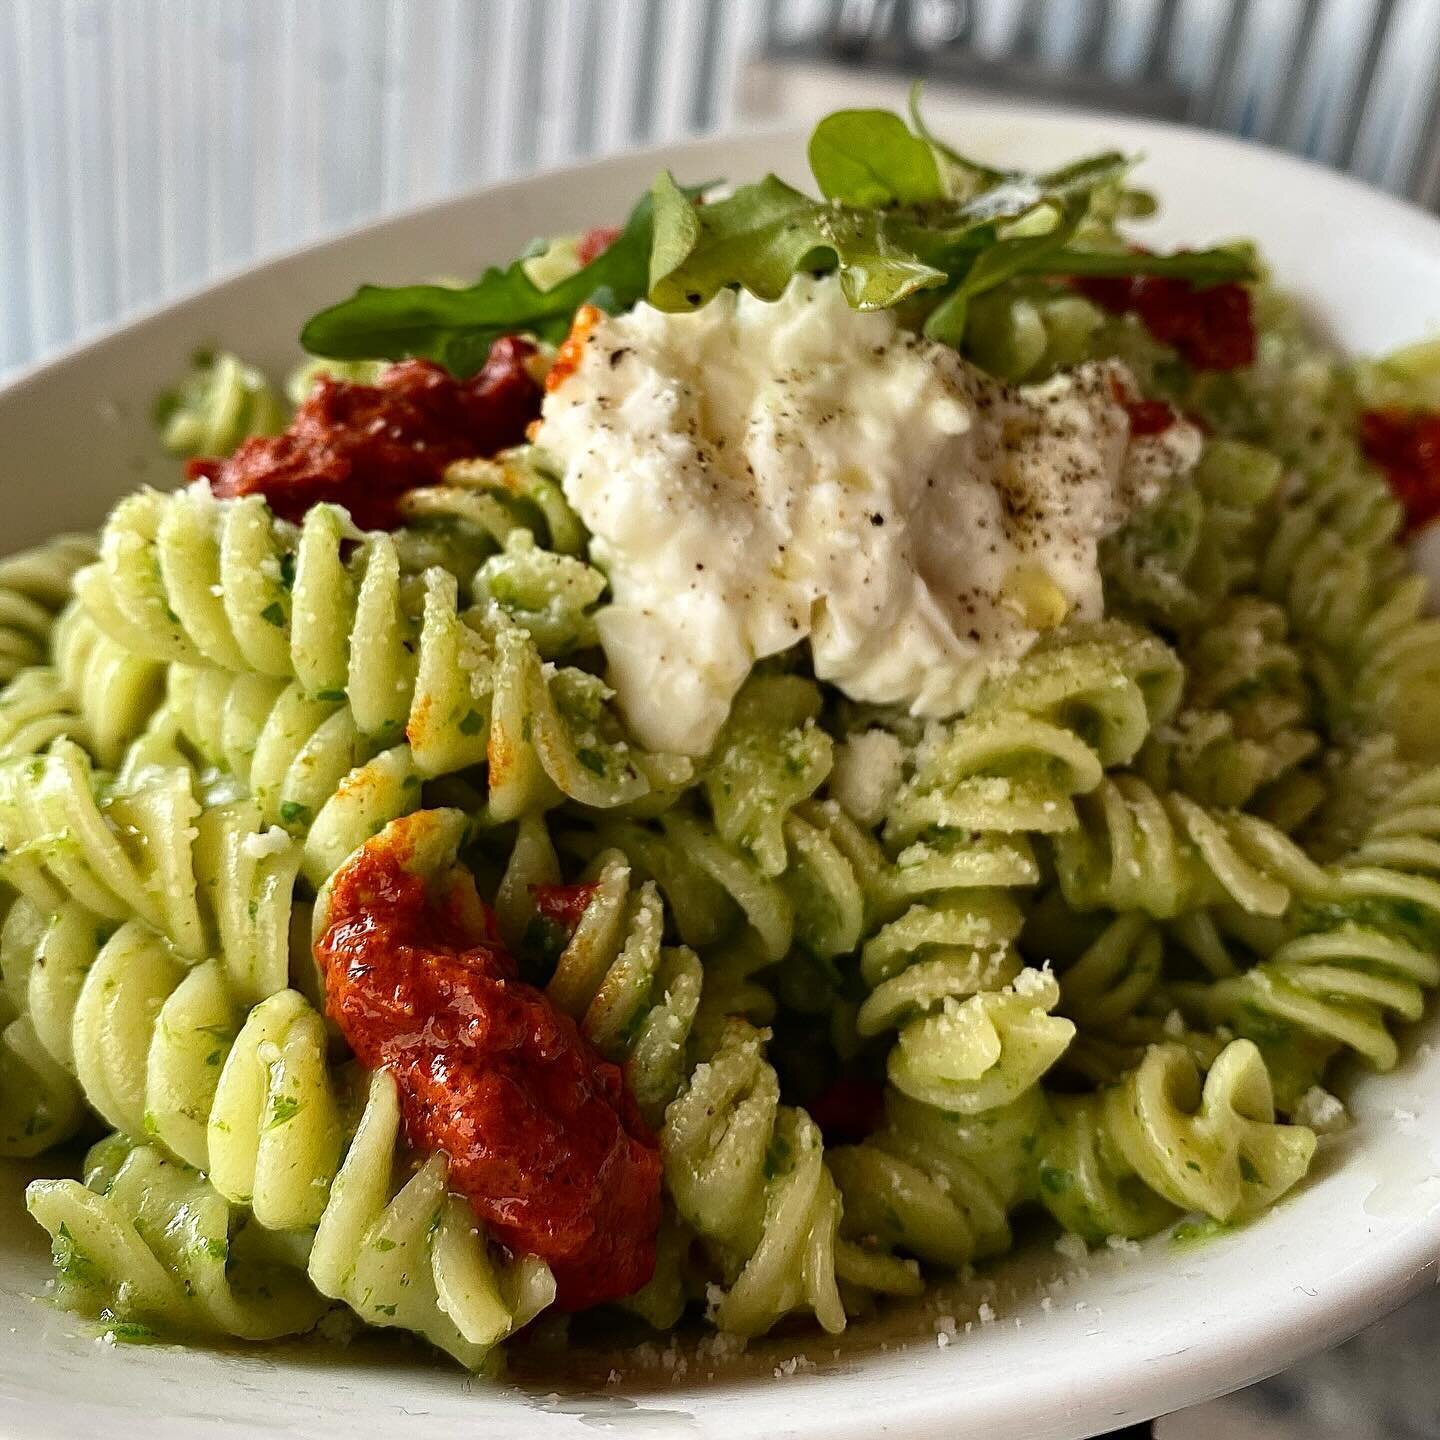 Happy Friday!!! Come in and try this Arugula Ginger Pesto while we have it!🤤

ALSO we will be closed this coming Monday and Tuesday (March 11-12) Thanks for your understanding! See you soon🍝❤️